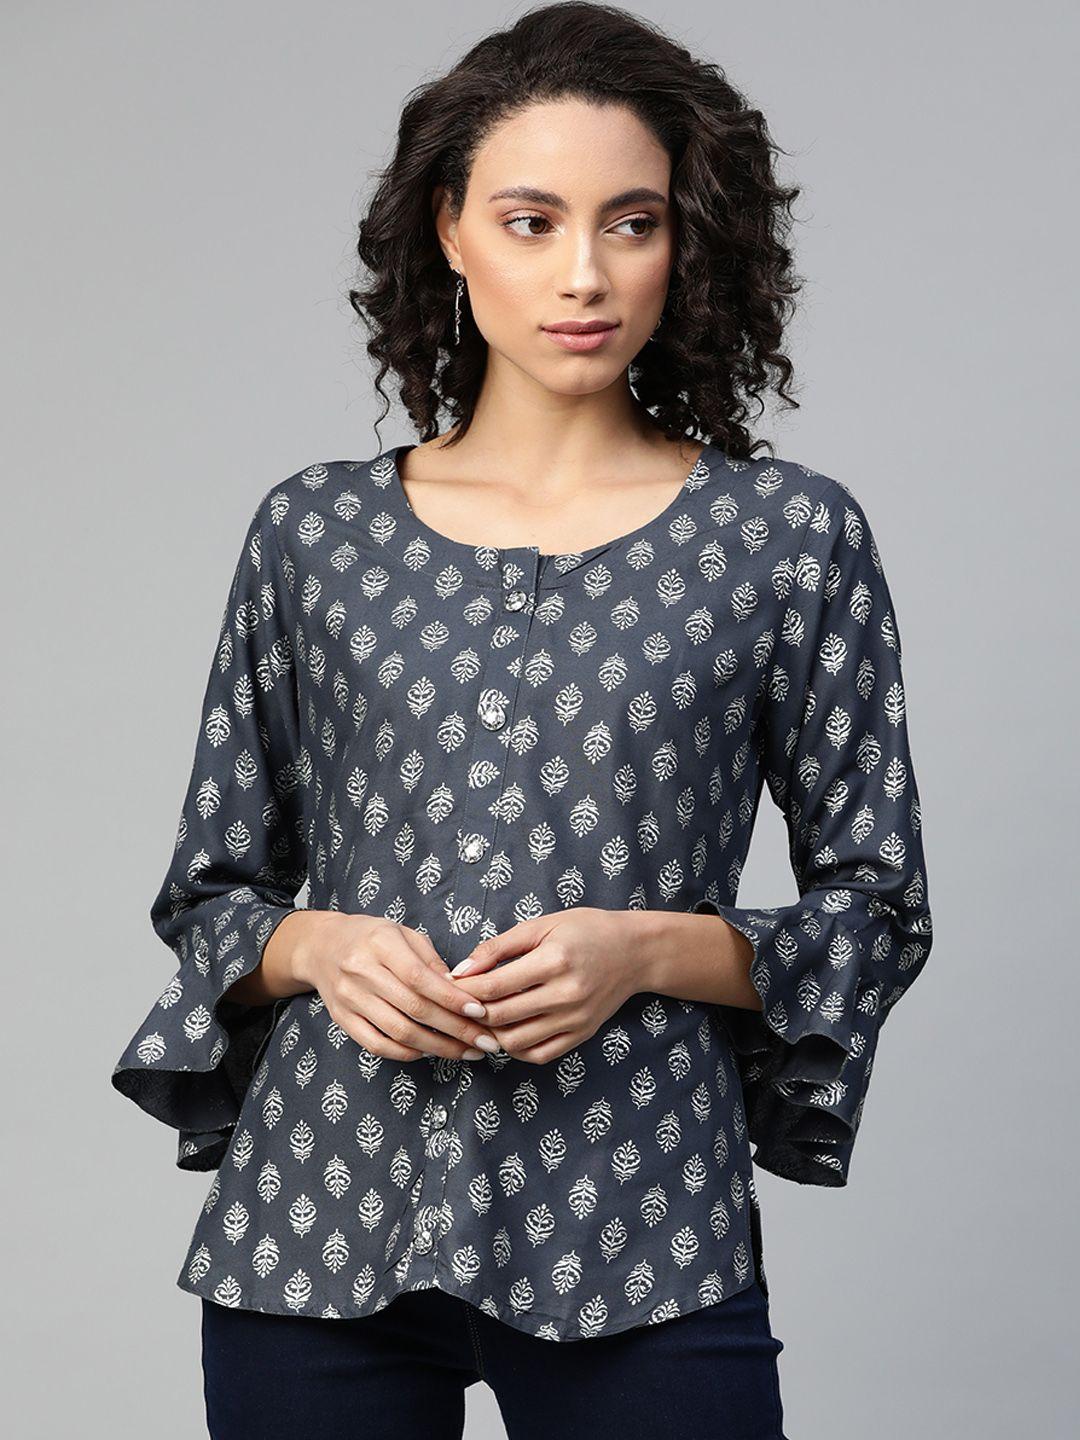 highlight fashion export charcoal grey & silver foil printed bell sleeves top